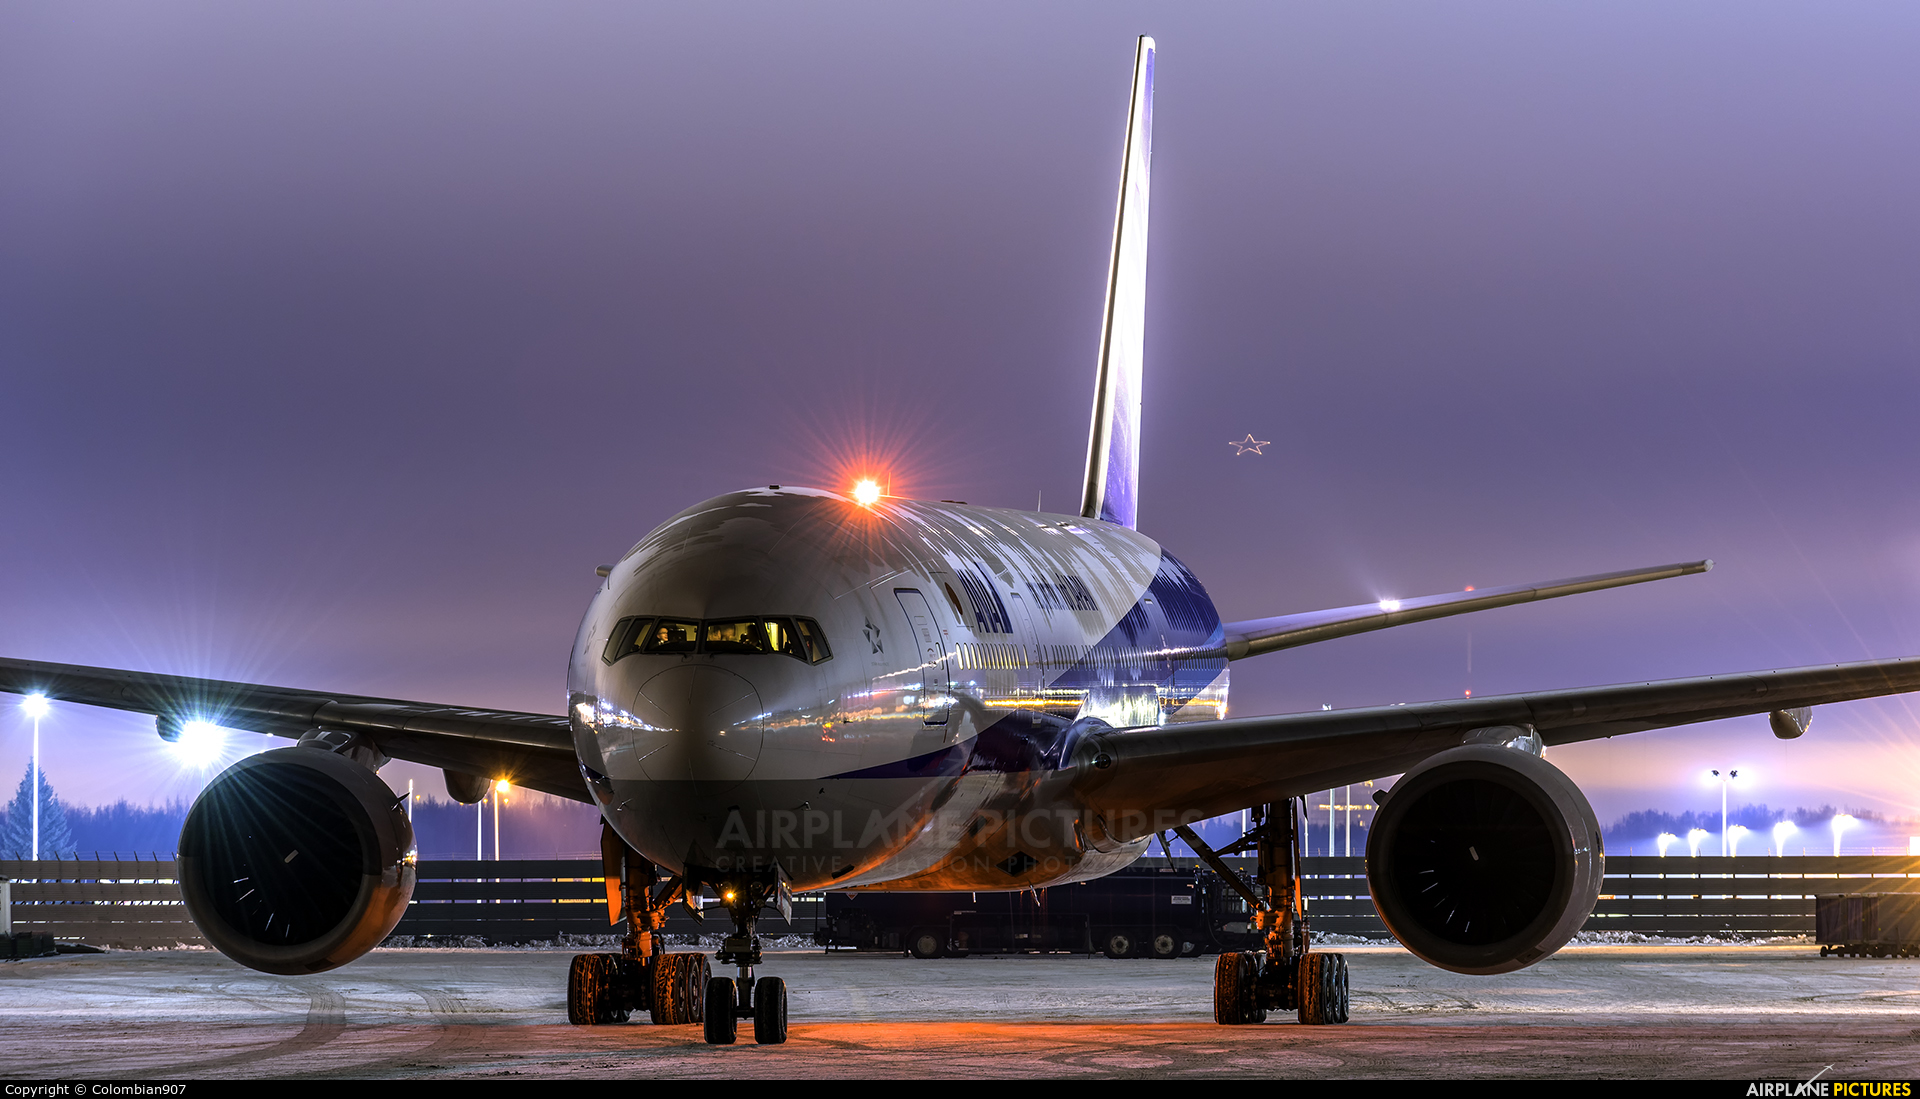 JA701A - ANA - All Nippon Airways Boeing 777-200 at Anchorage